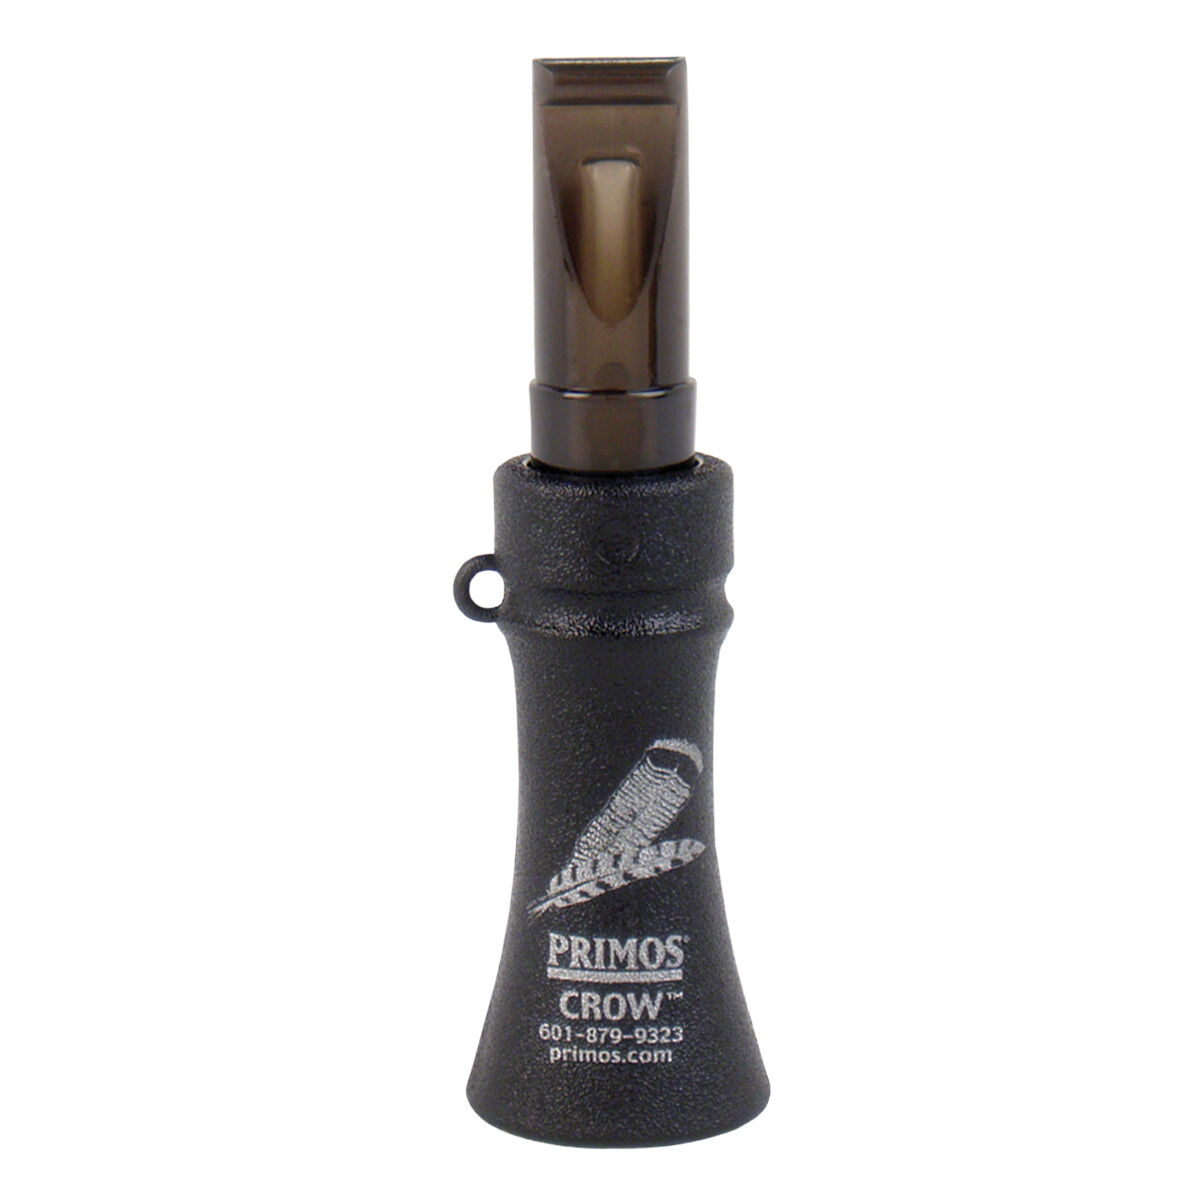 Primos Crow Call for Hunting Crows Turkey Locator 302 Gobbler Jake Tom 